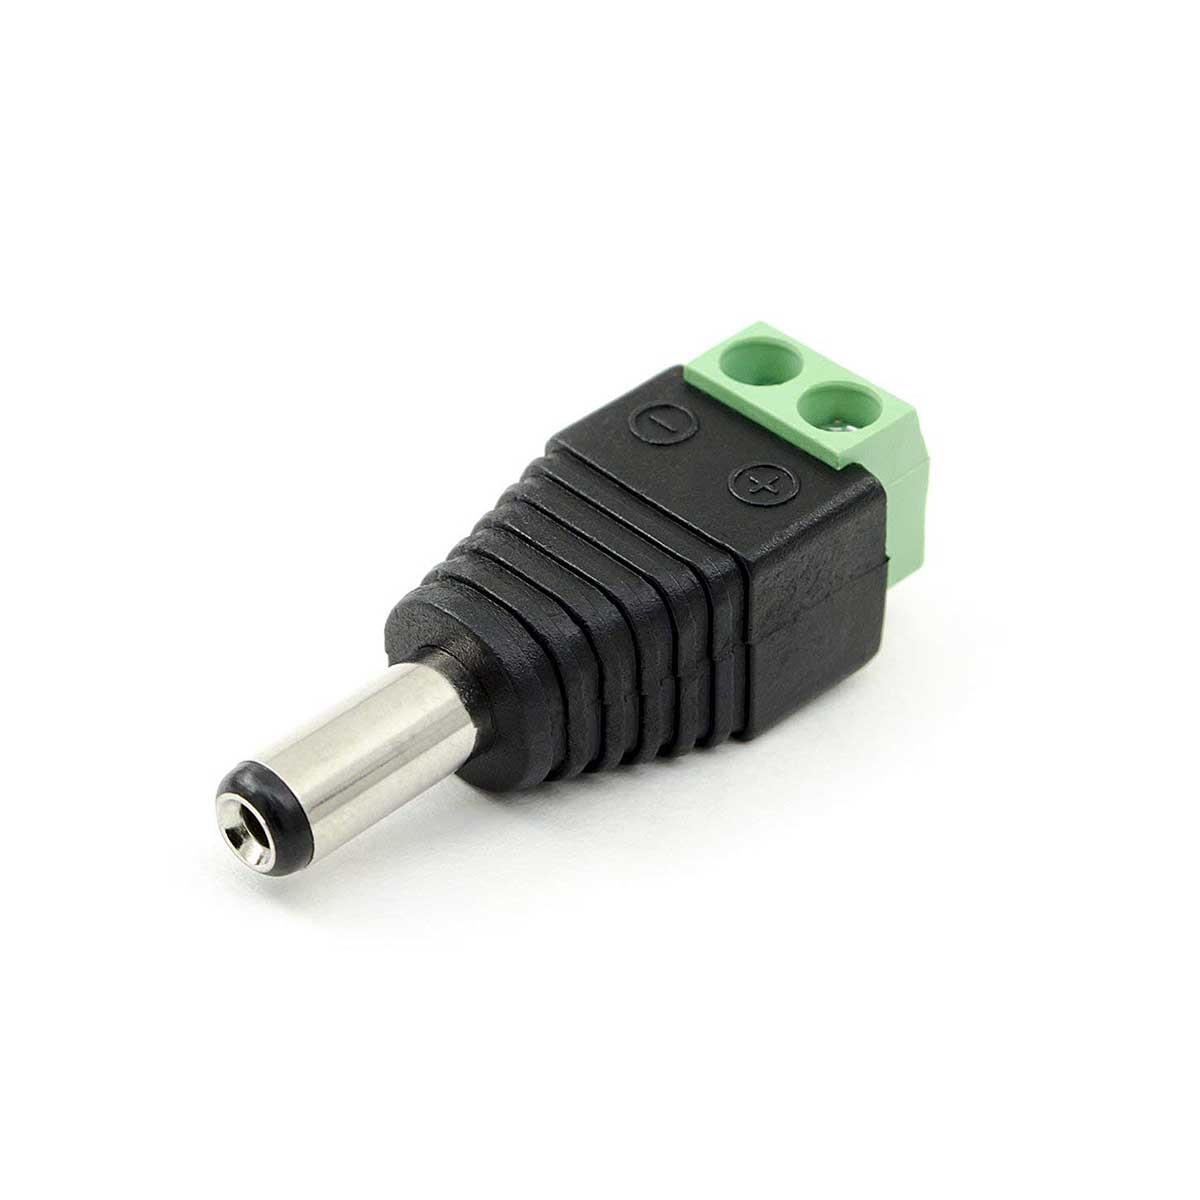 5.5 x 2.5mm DC Male Plug Power Connector to Terminal Block